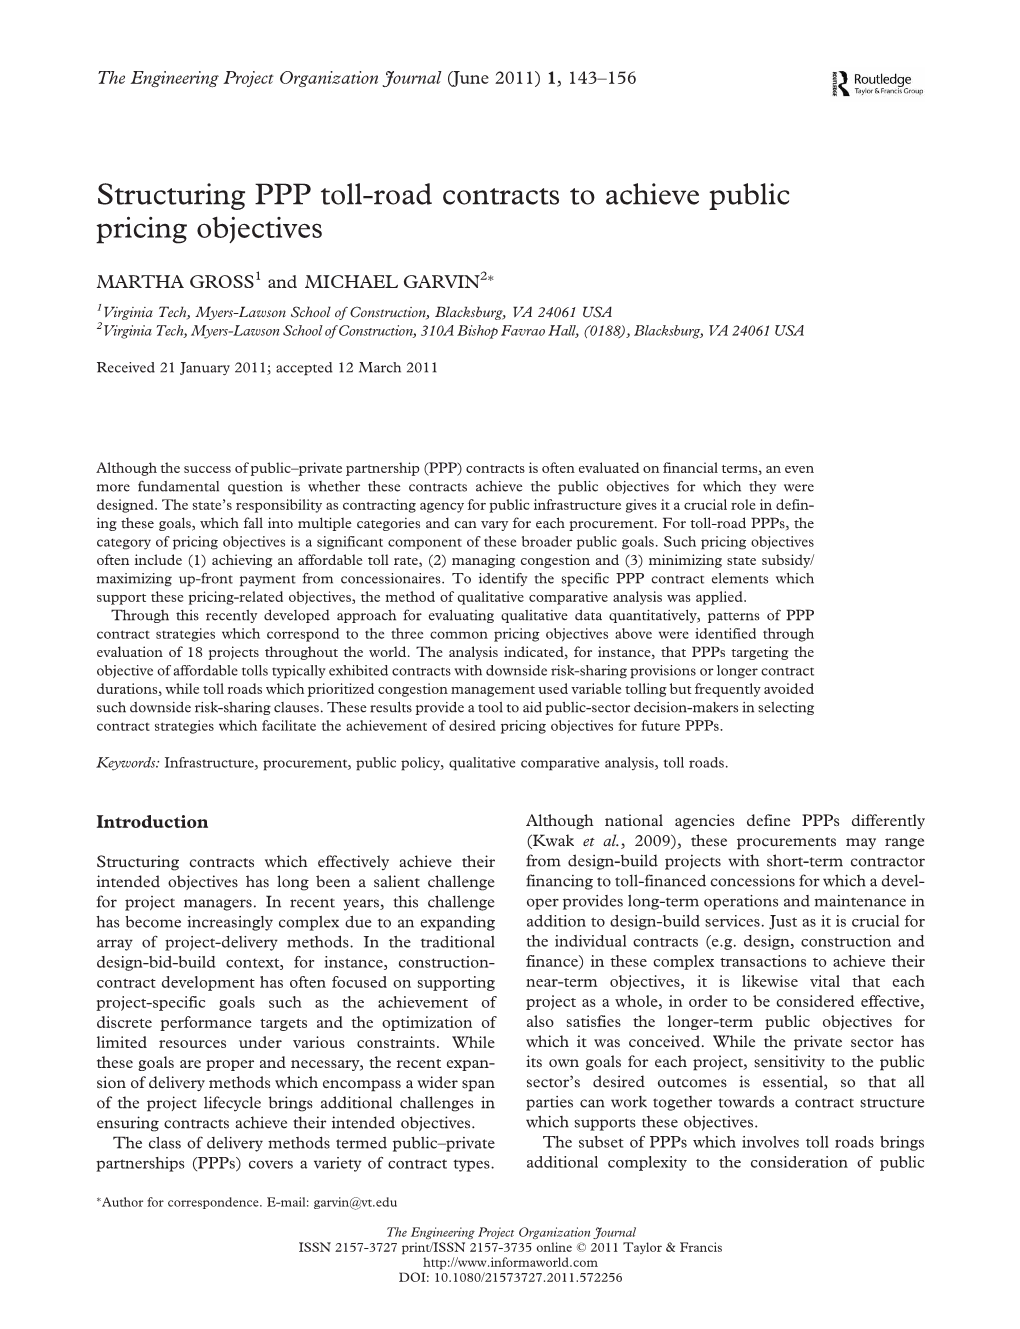 Structuring PPP Toll-Road Contracts to Achieve Public Pricing Objectives